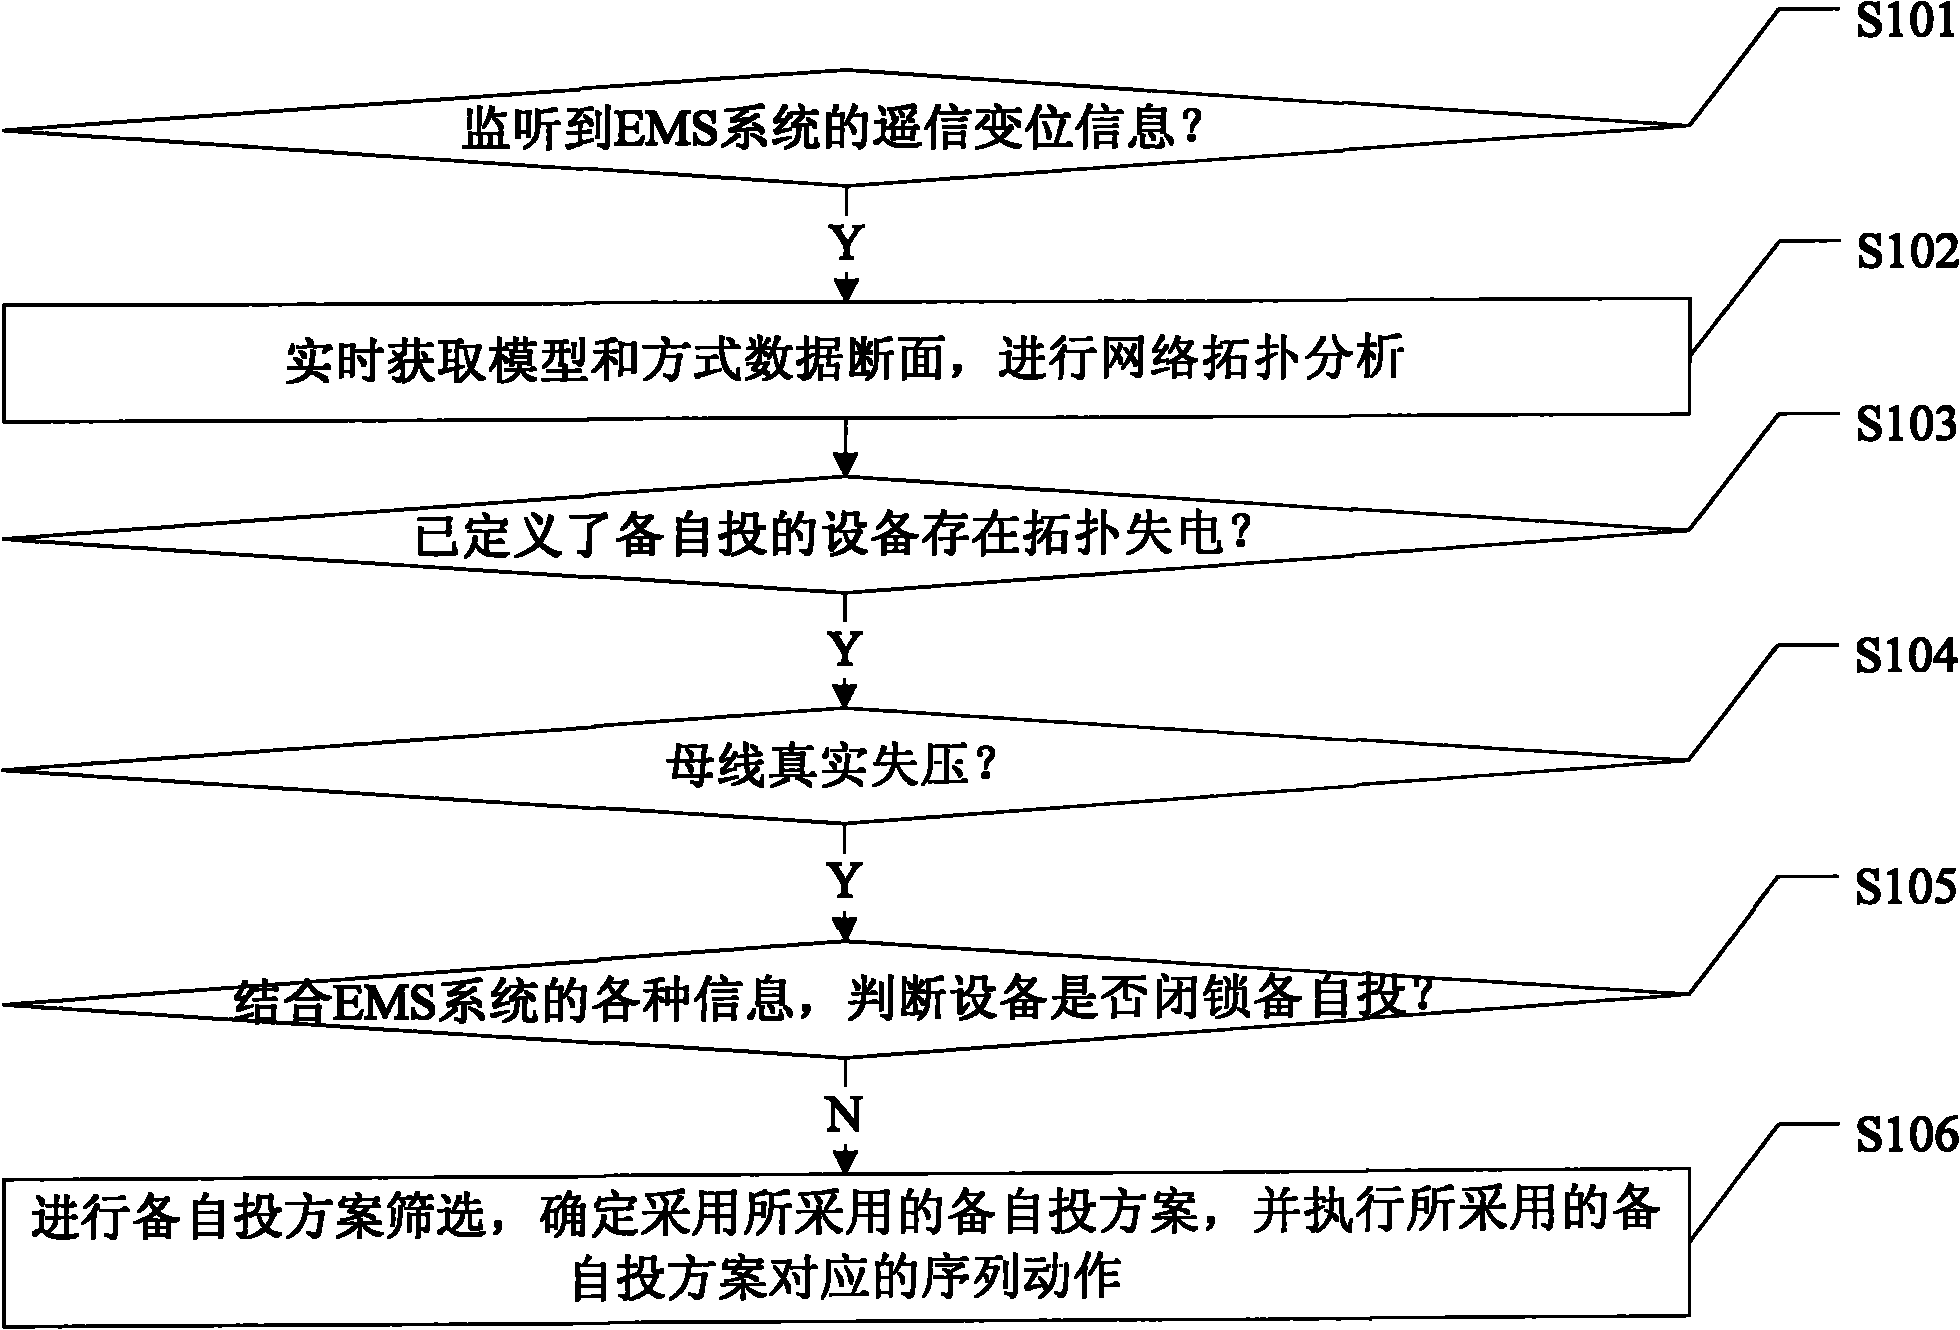 Method and system for automatically switching master station-centralized spare power source